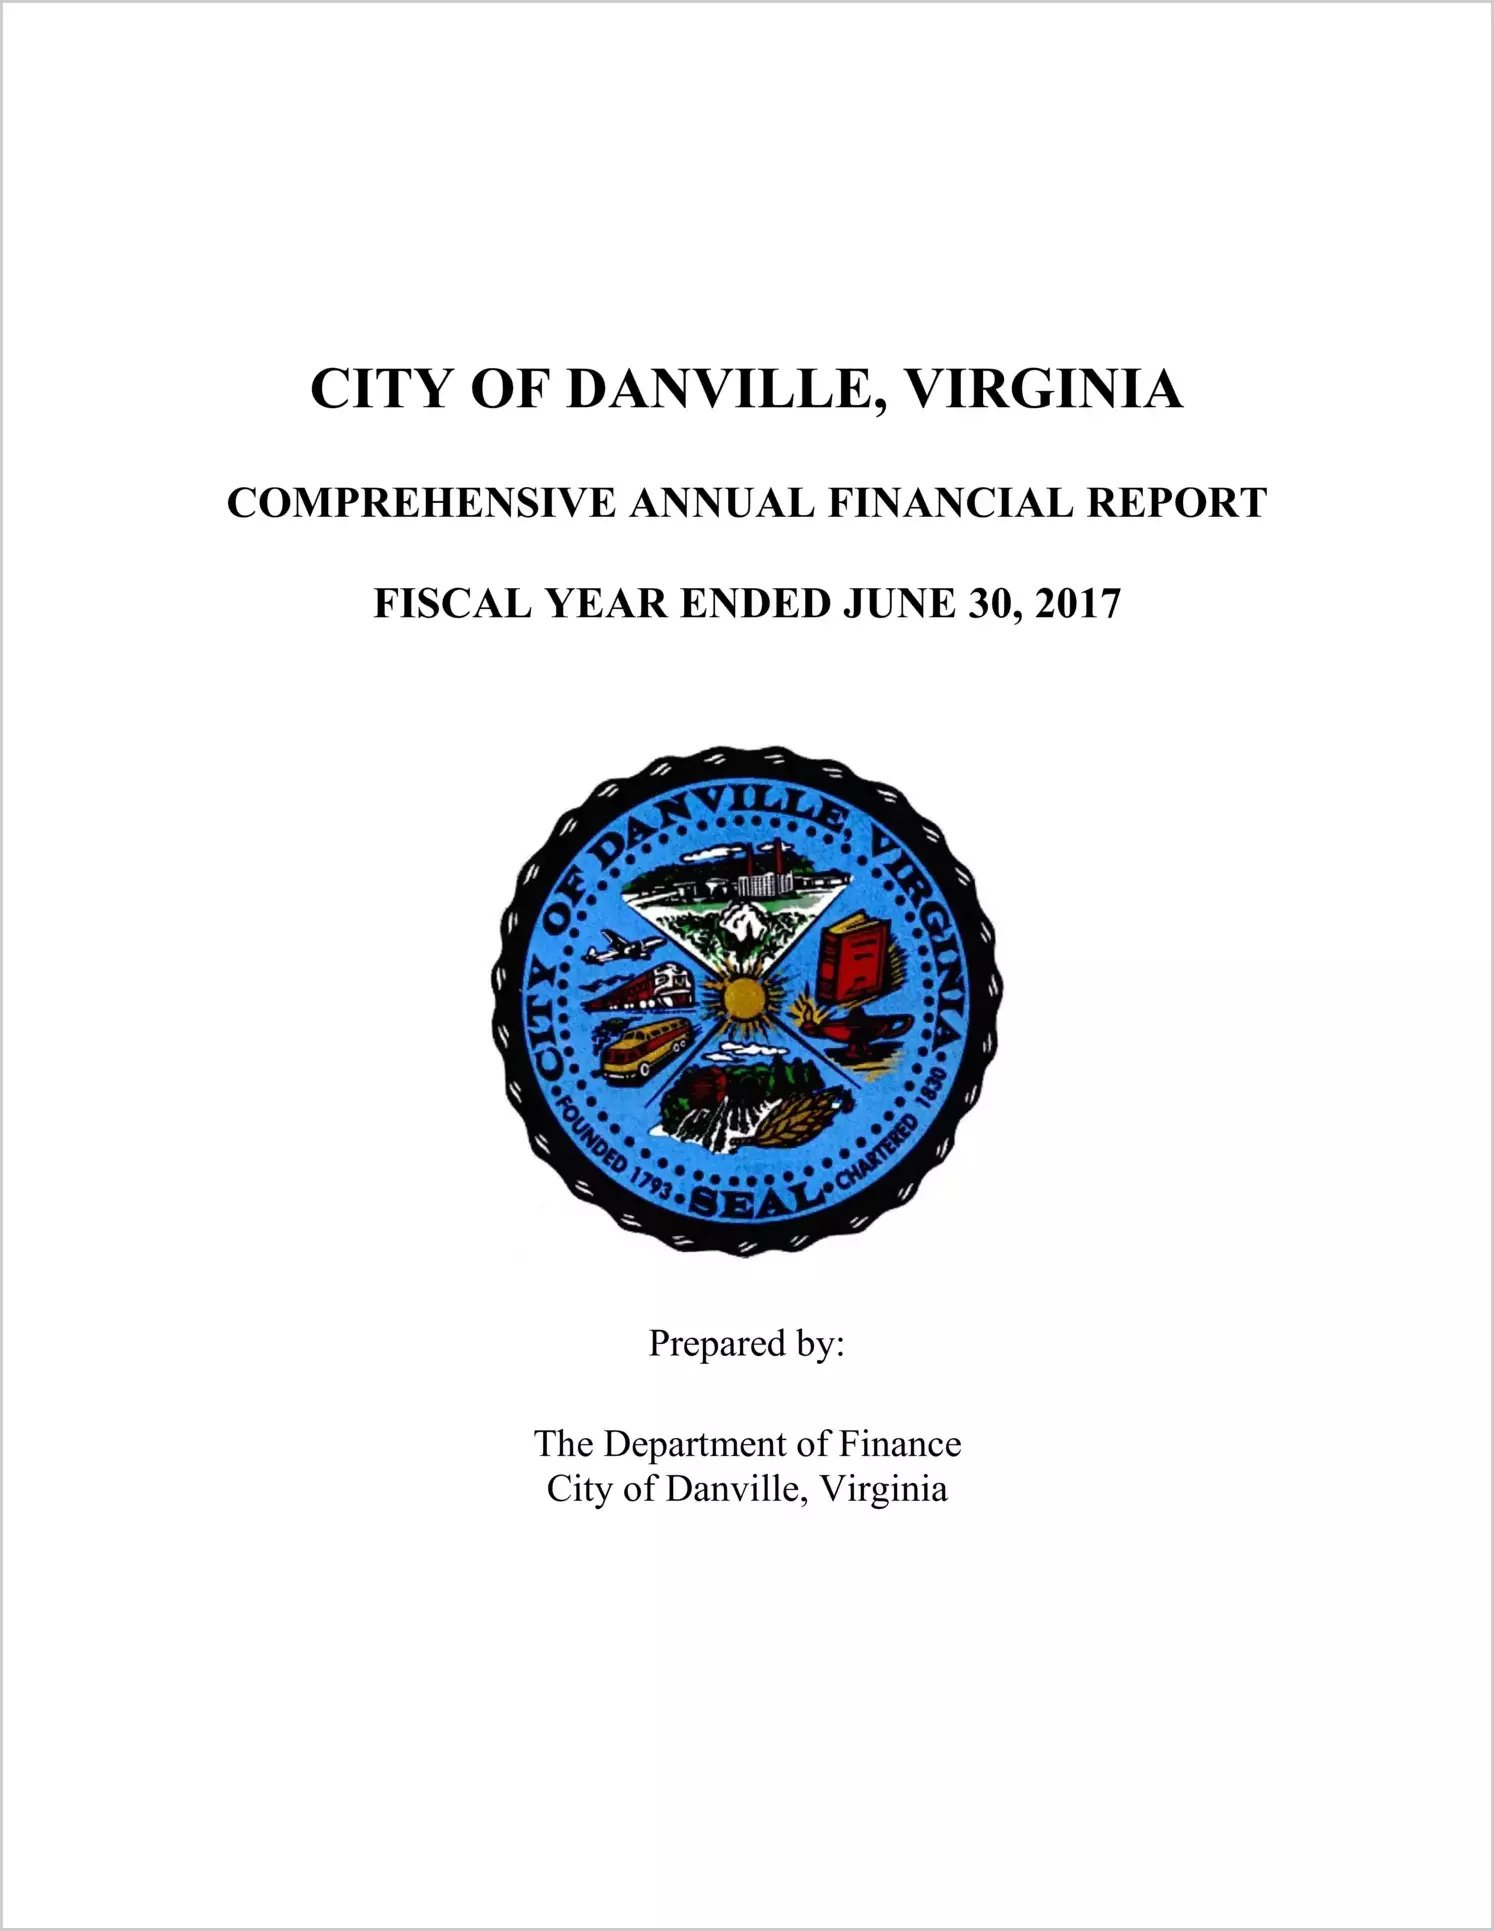 2017 Annual Financial Report for City of Danville